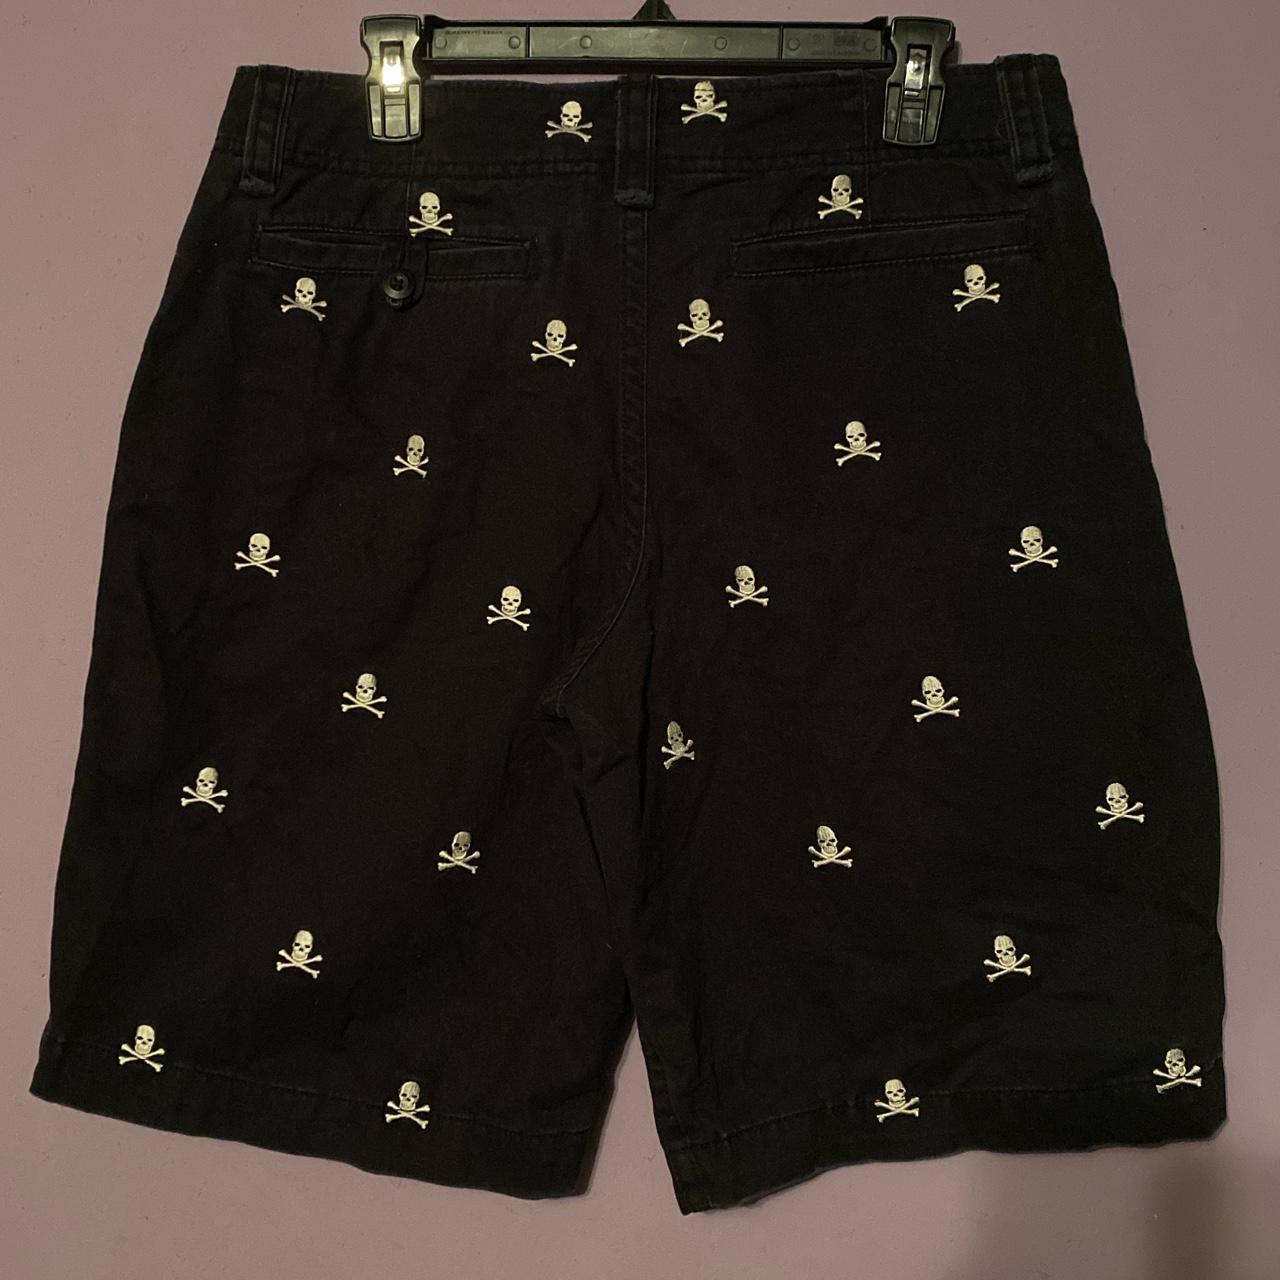 Mossimo Men's Black and White Shorts (2)